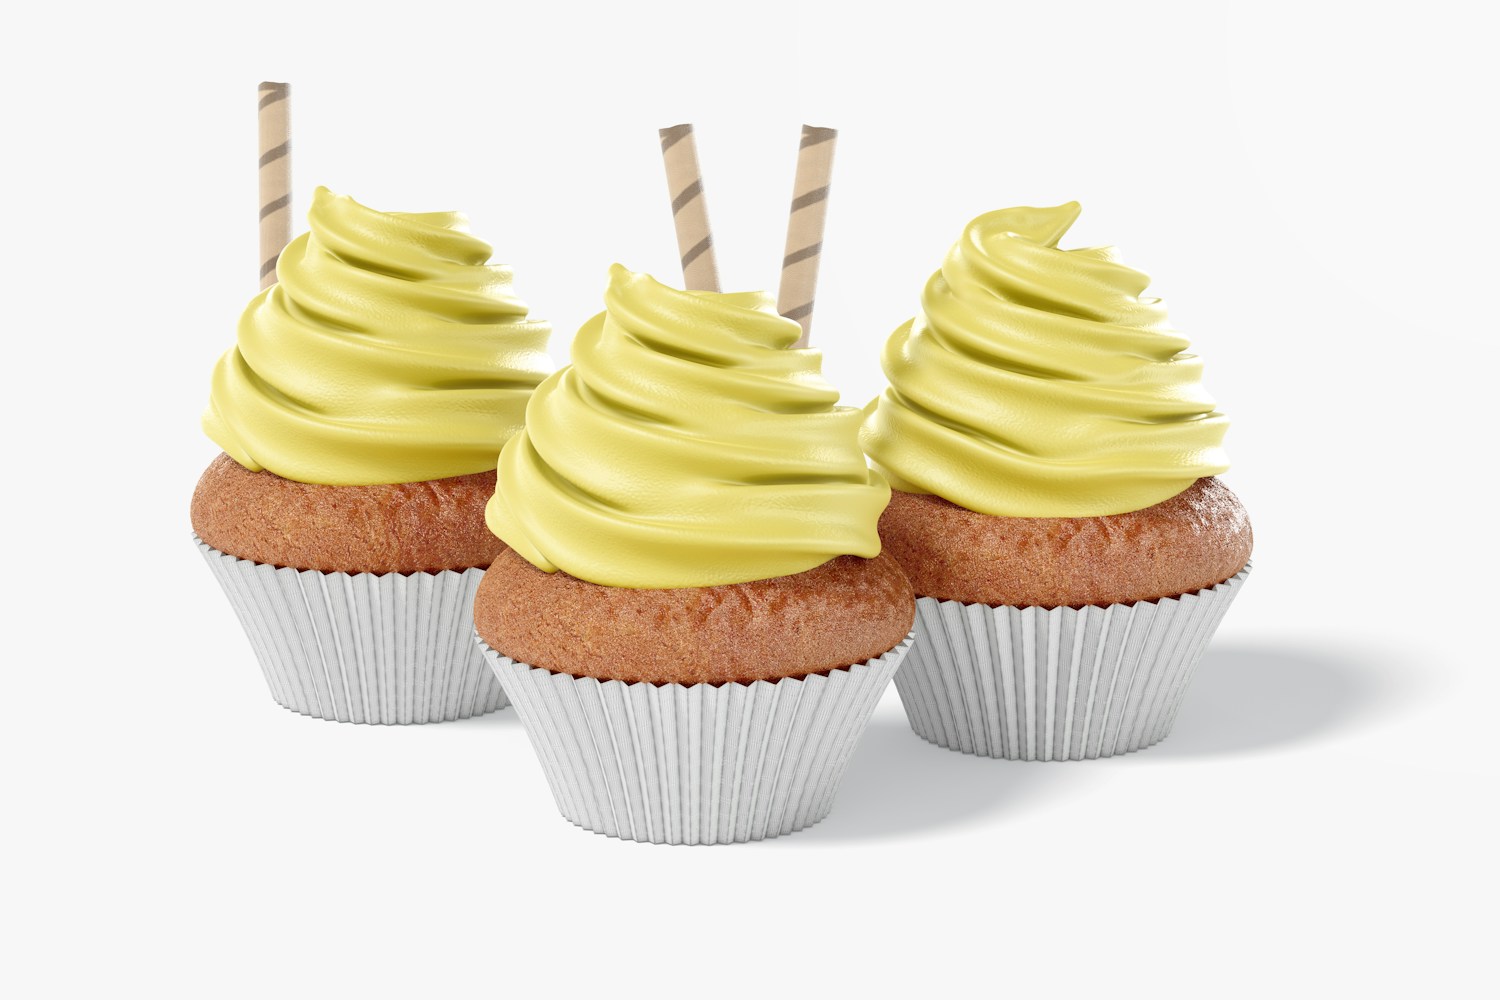 Cupcakes with Paper Baking Cup Mockup